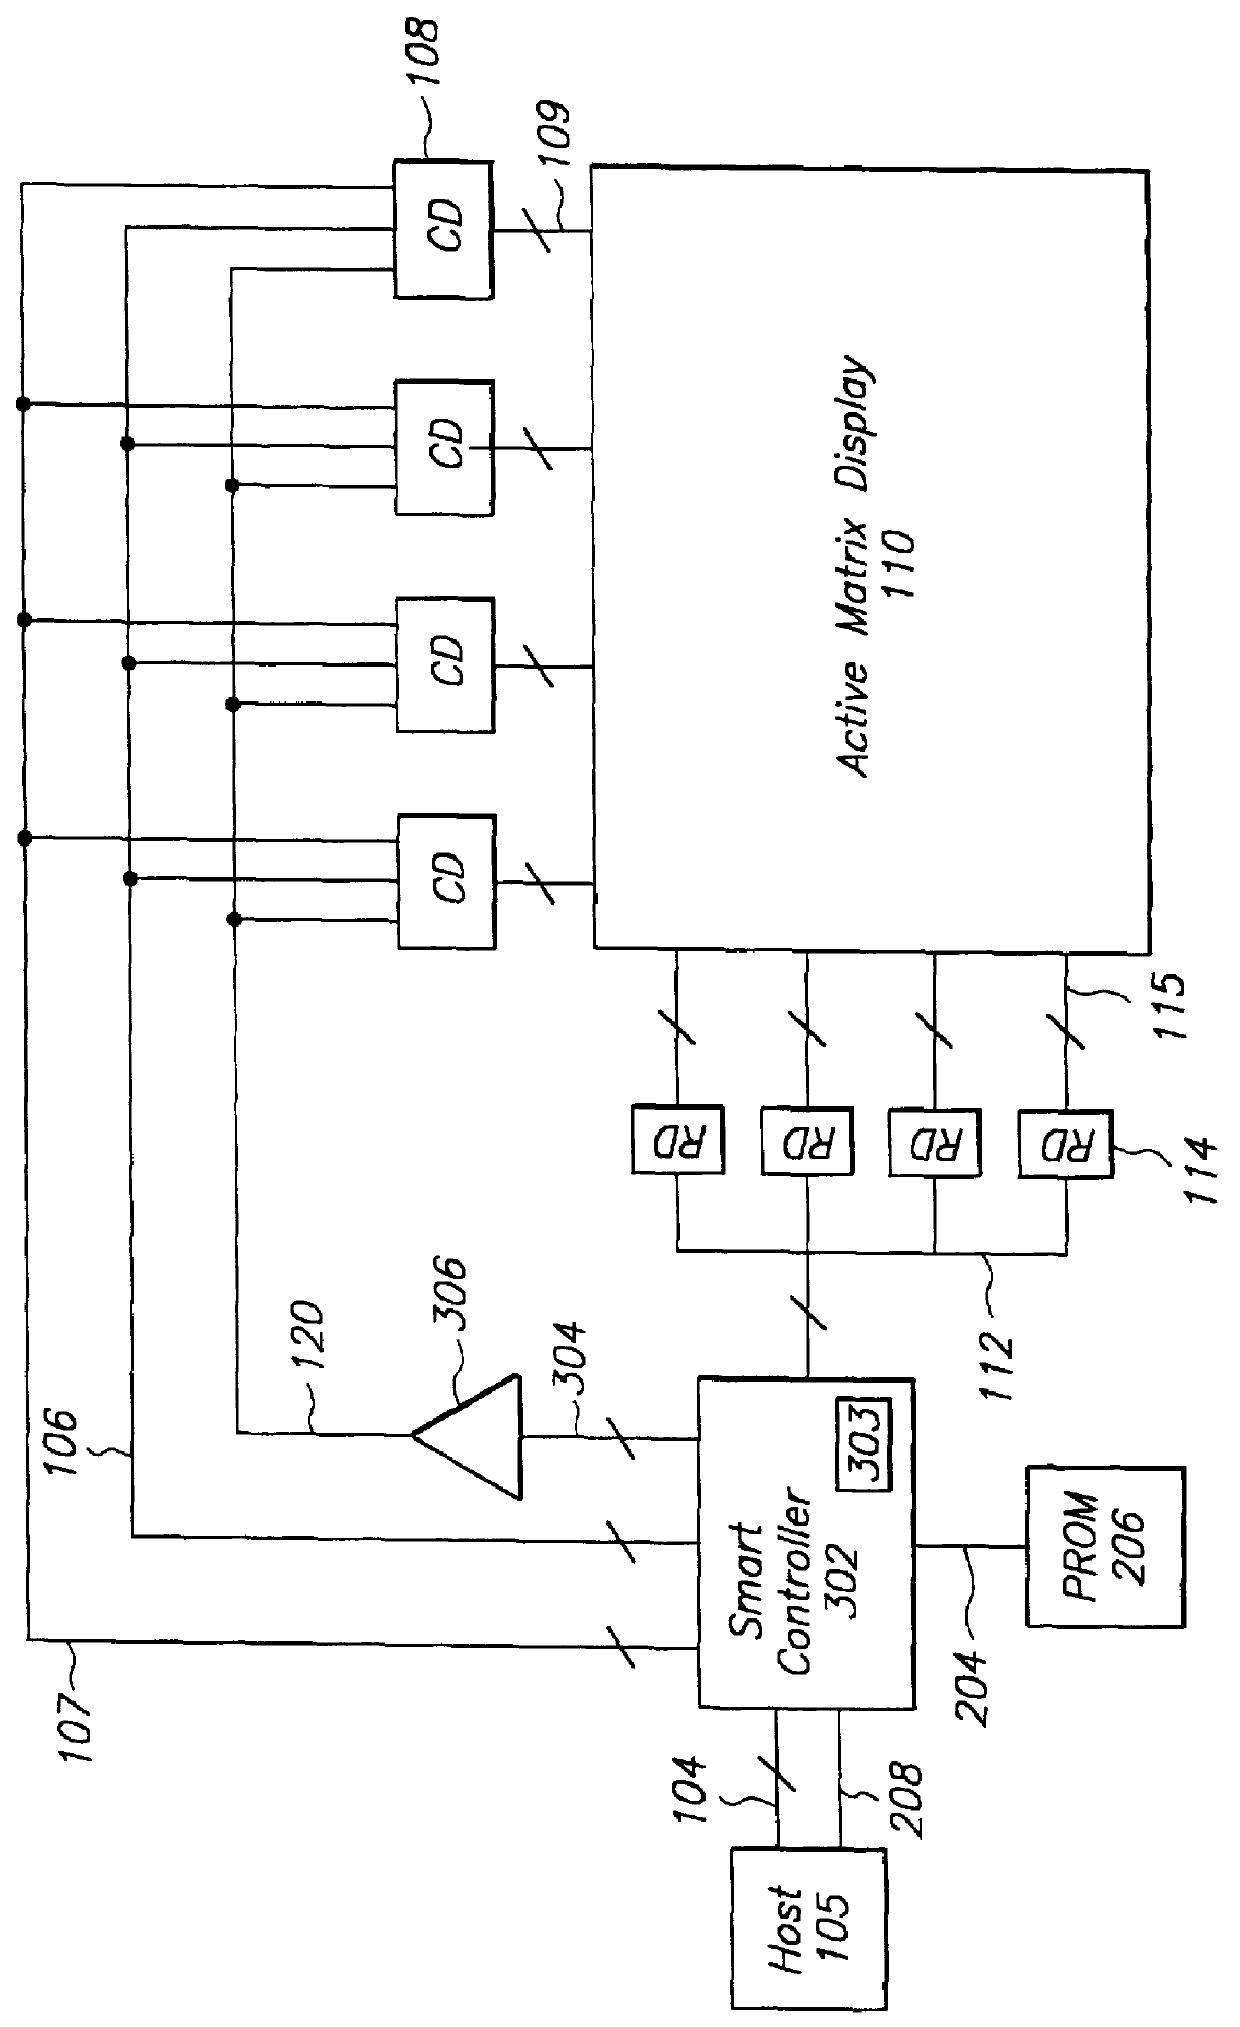 System and method for controlling an active matrix display